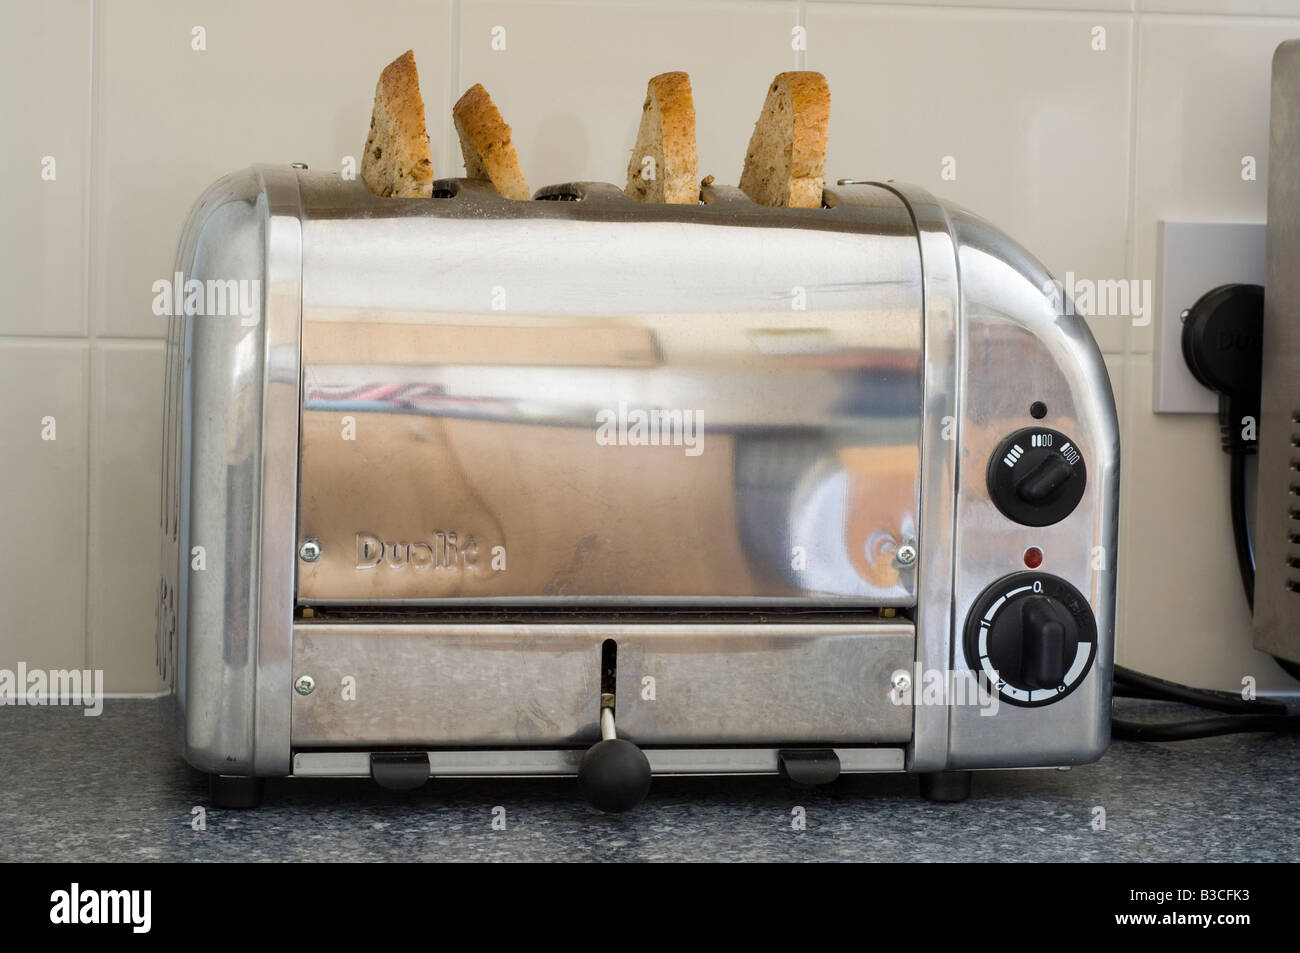 https://c8.alamy.com/comp/B3CFK3/top-quality-dualit-toaster-in-stainless-steel-finish-with-four-slices-B3CFK3.jpg